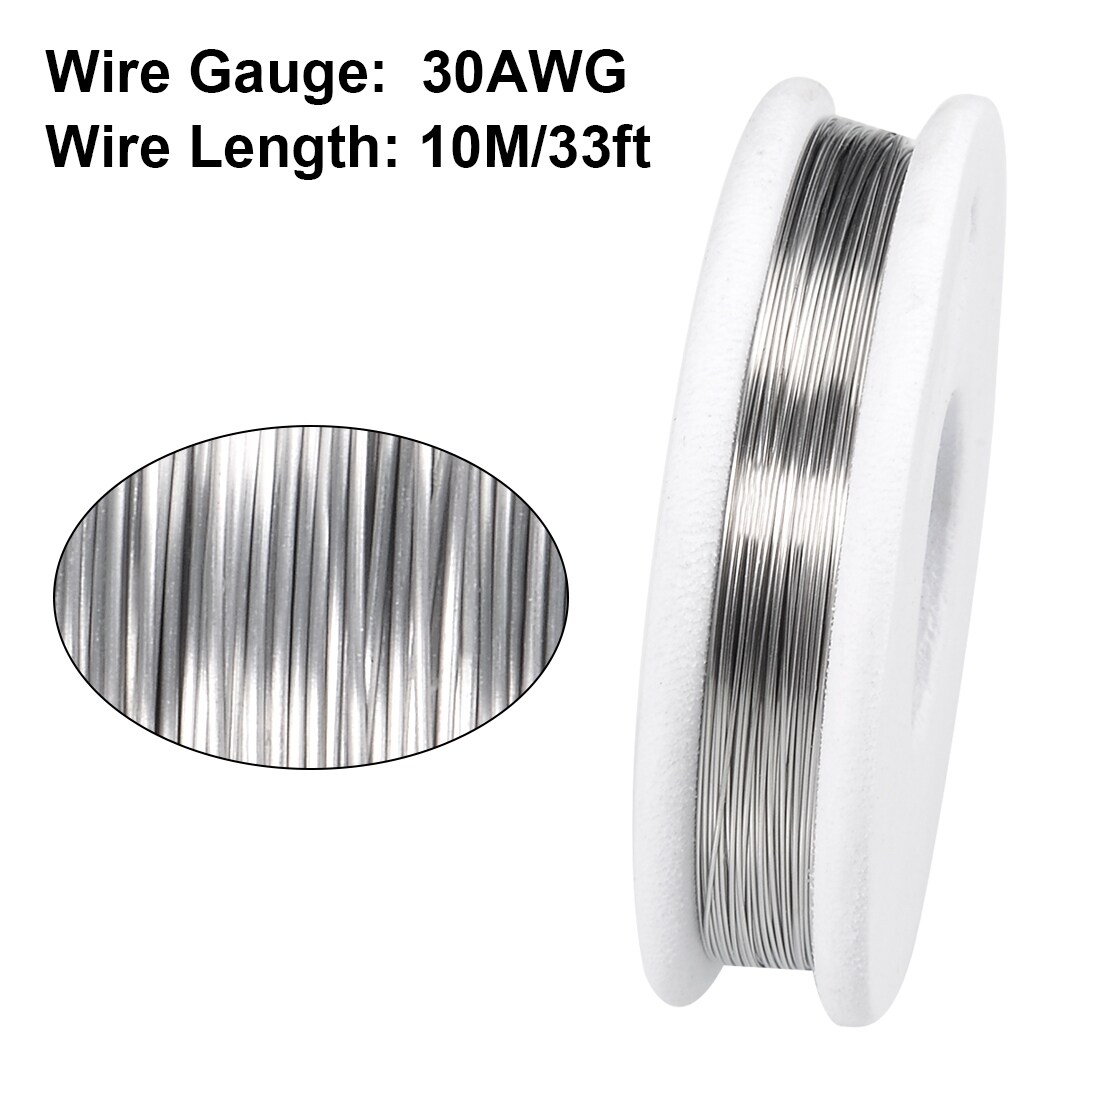 Unique Bargains 0.15mm 34AWG Heating Resistor Nichrome Wires for Heating Elements 98ft - 30m/98ft Length